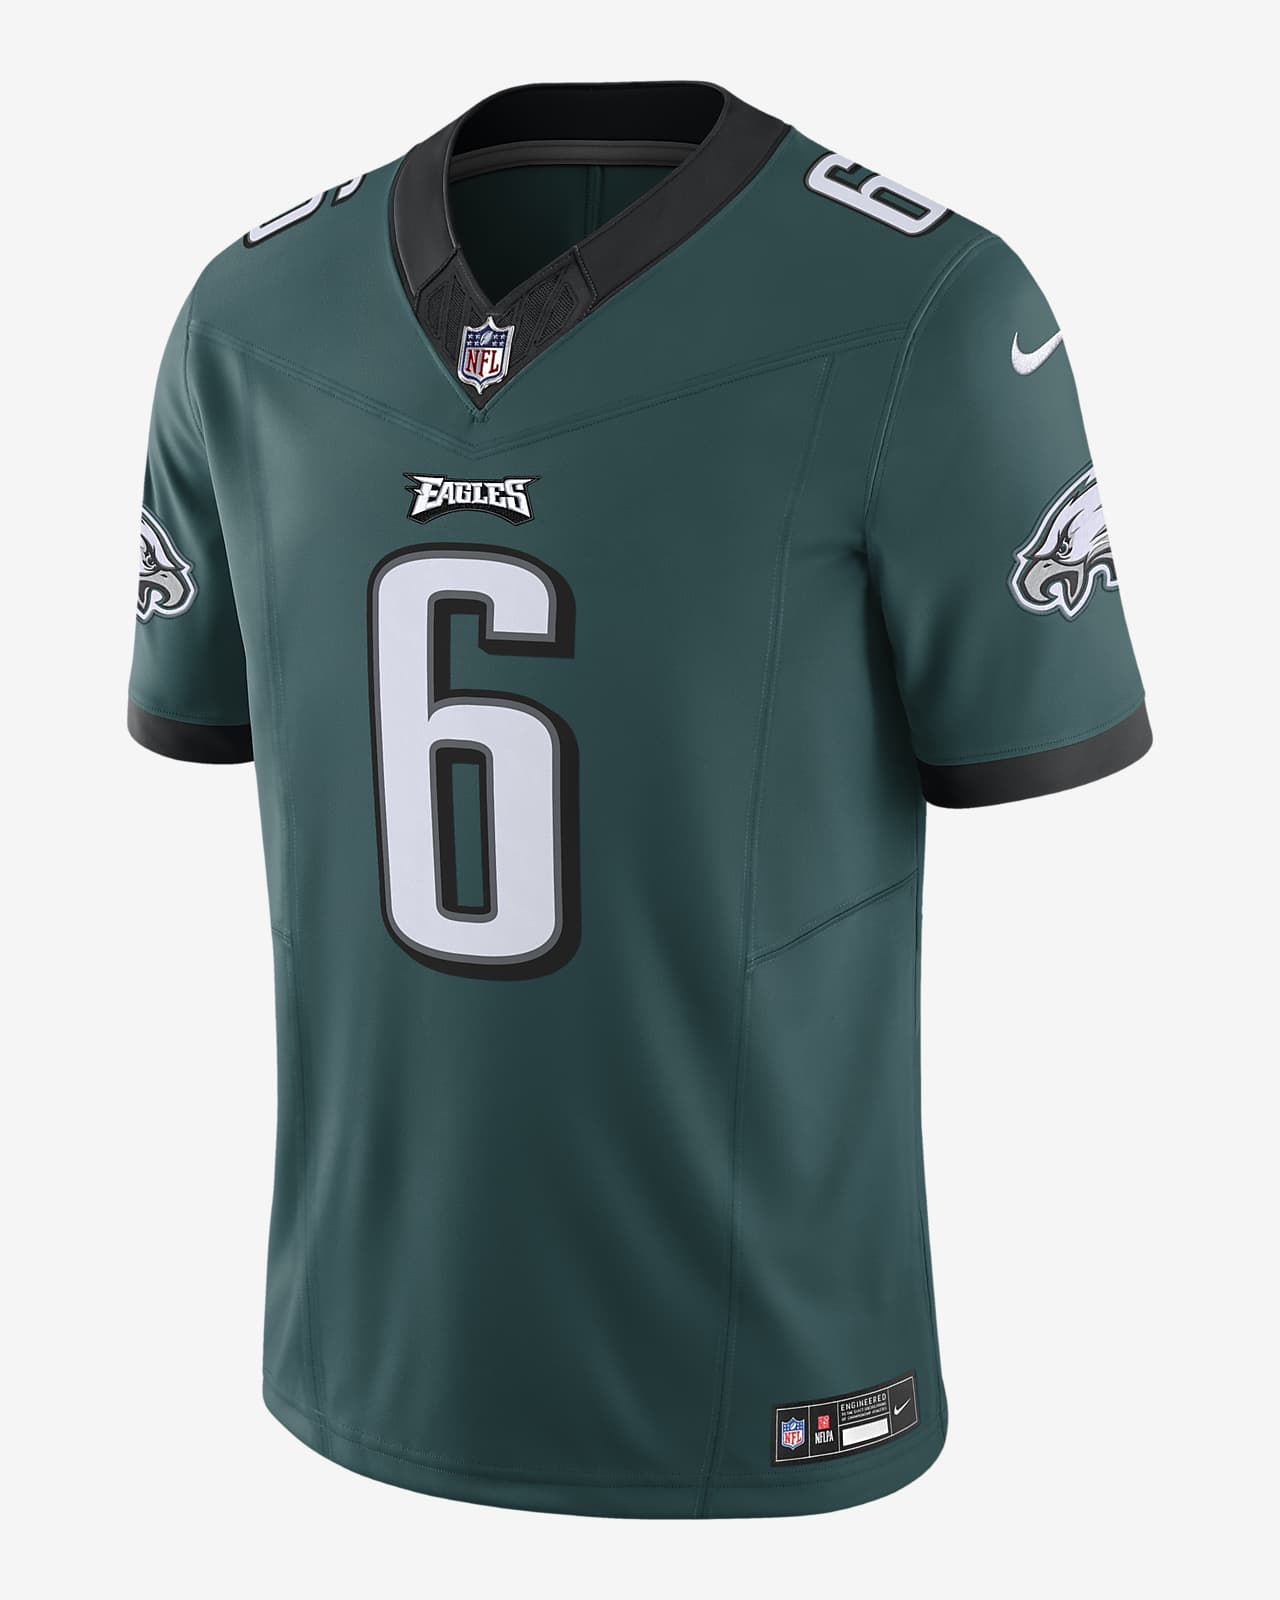 eagles jersey's